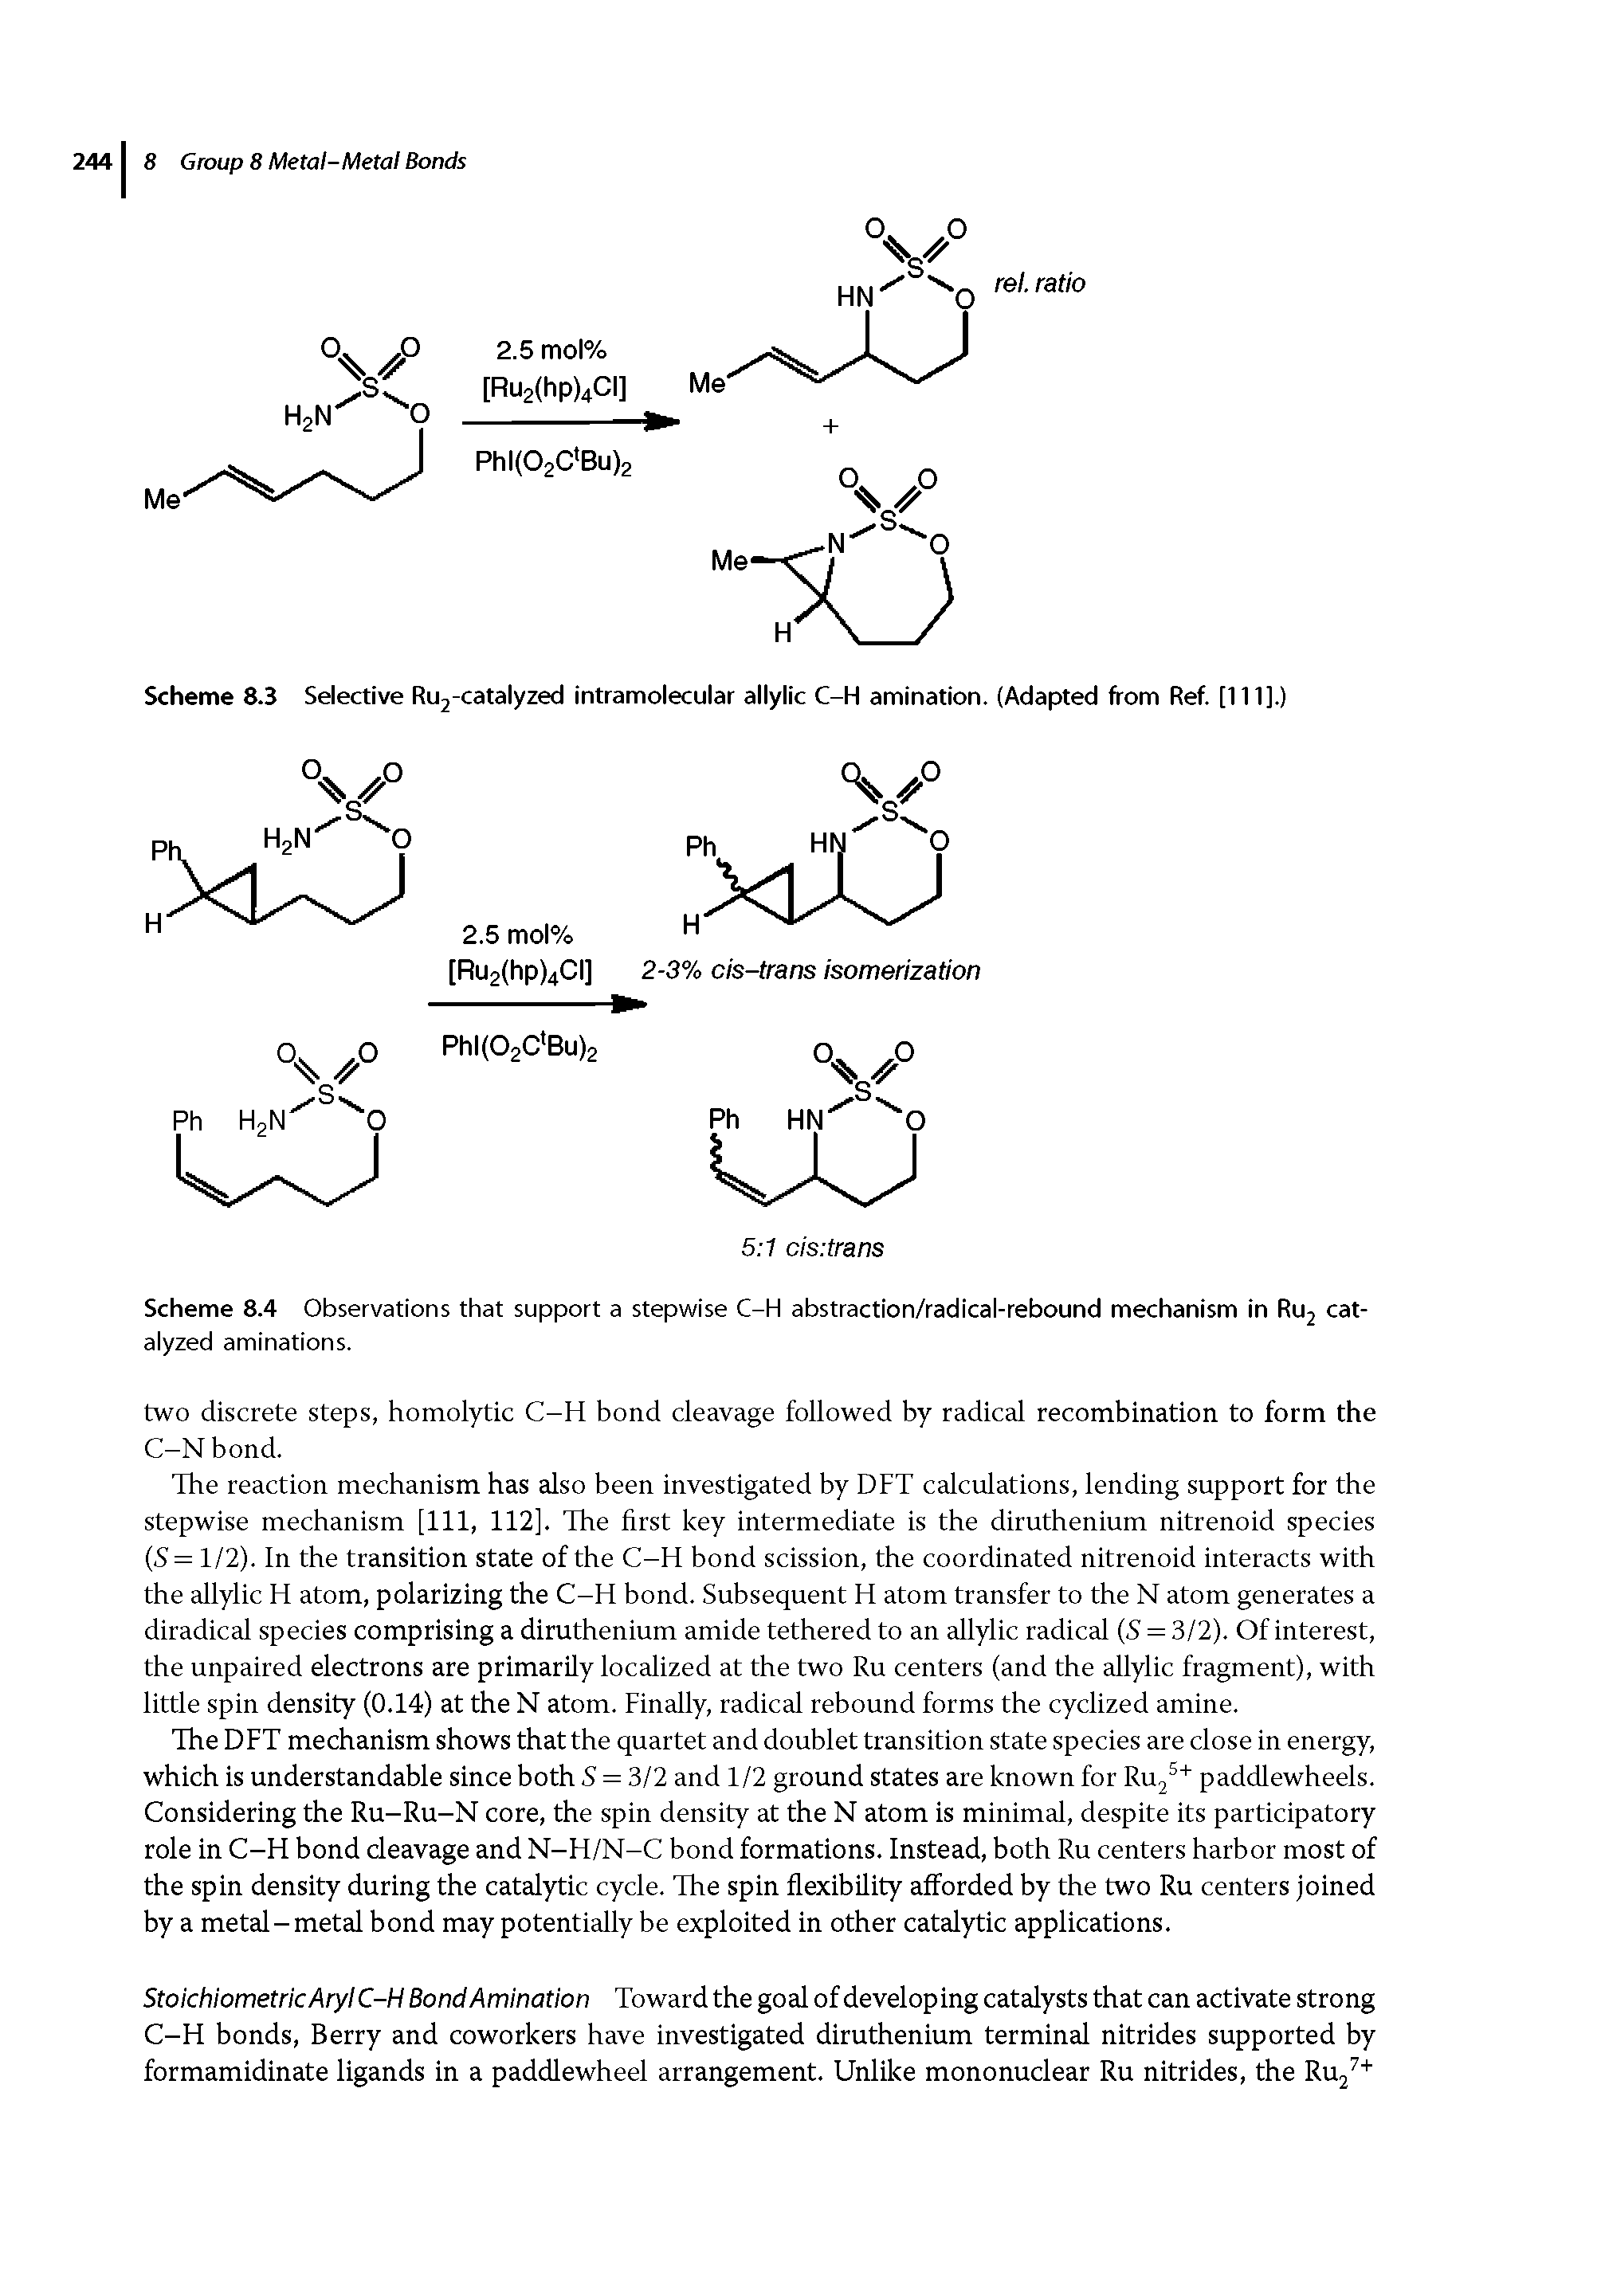 Scheme 8.4 Observations that support a stepwise C-H abstraction/radical-rebound mechanism in Ruj catalyzed aminations.